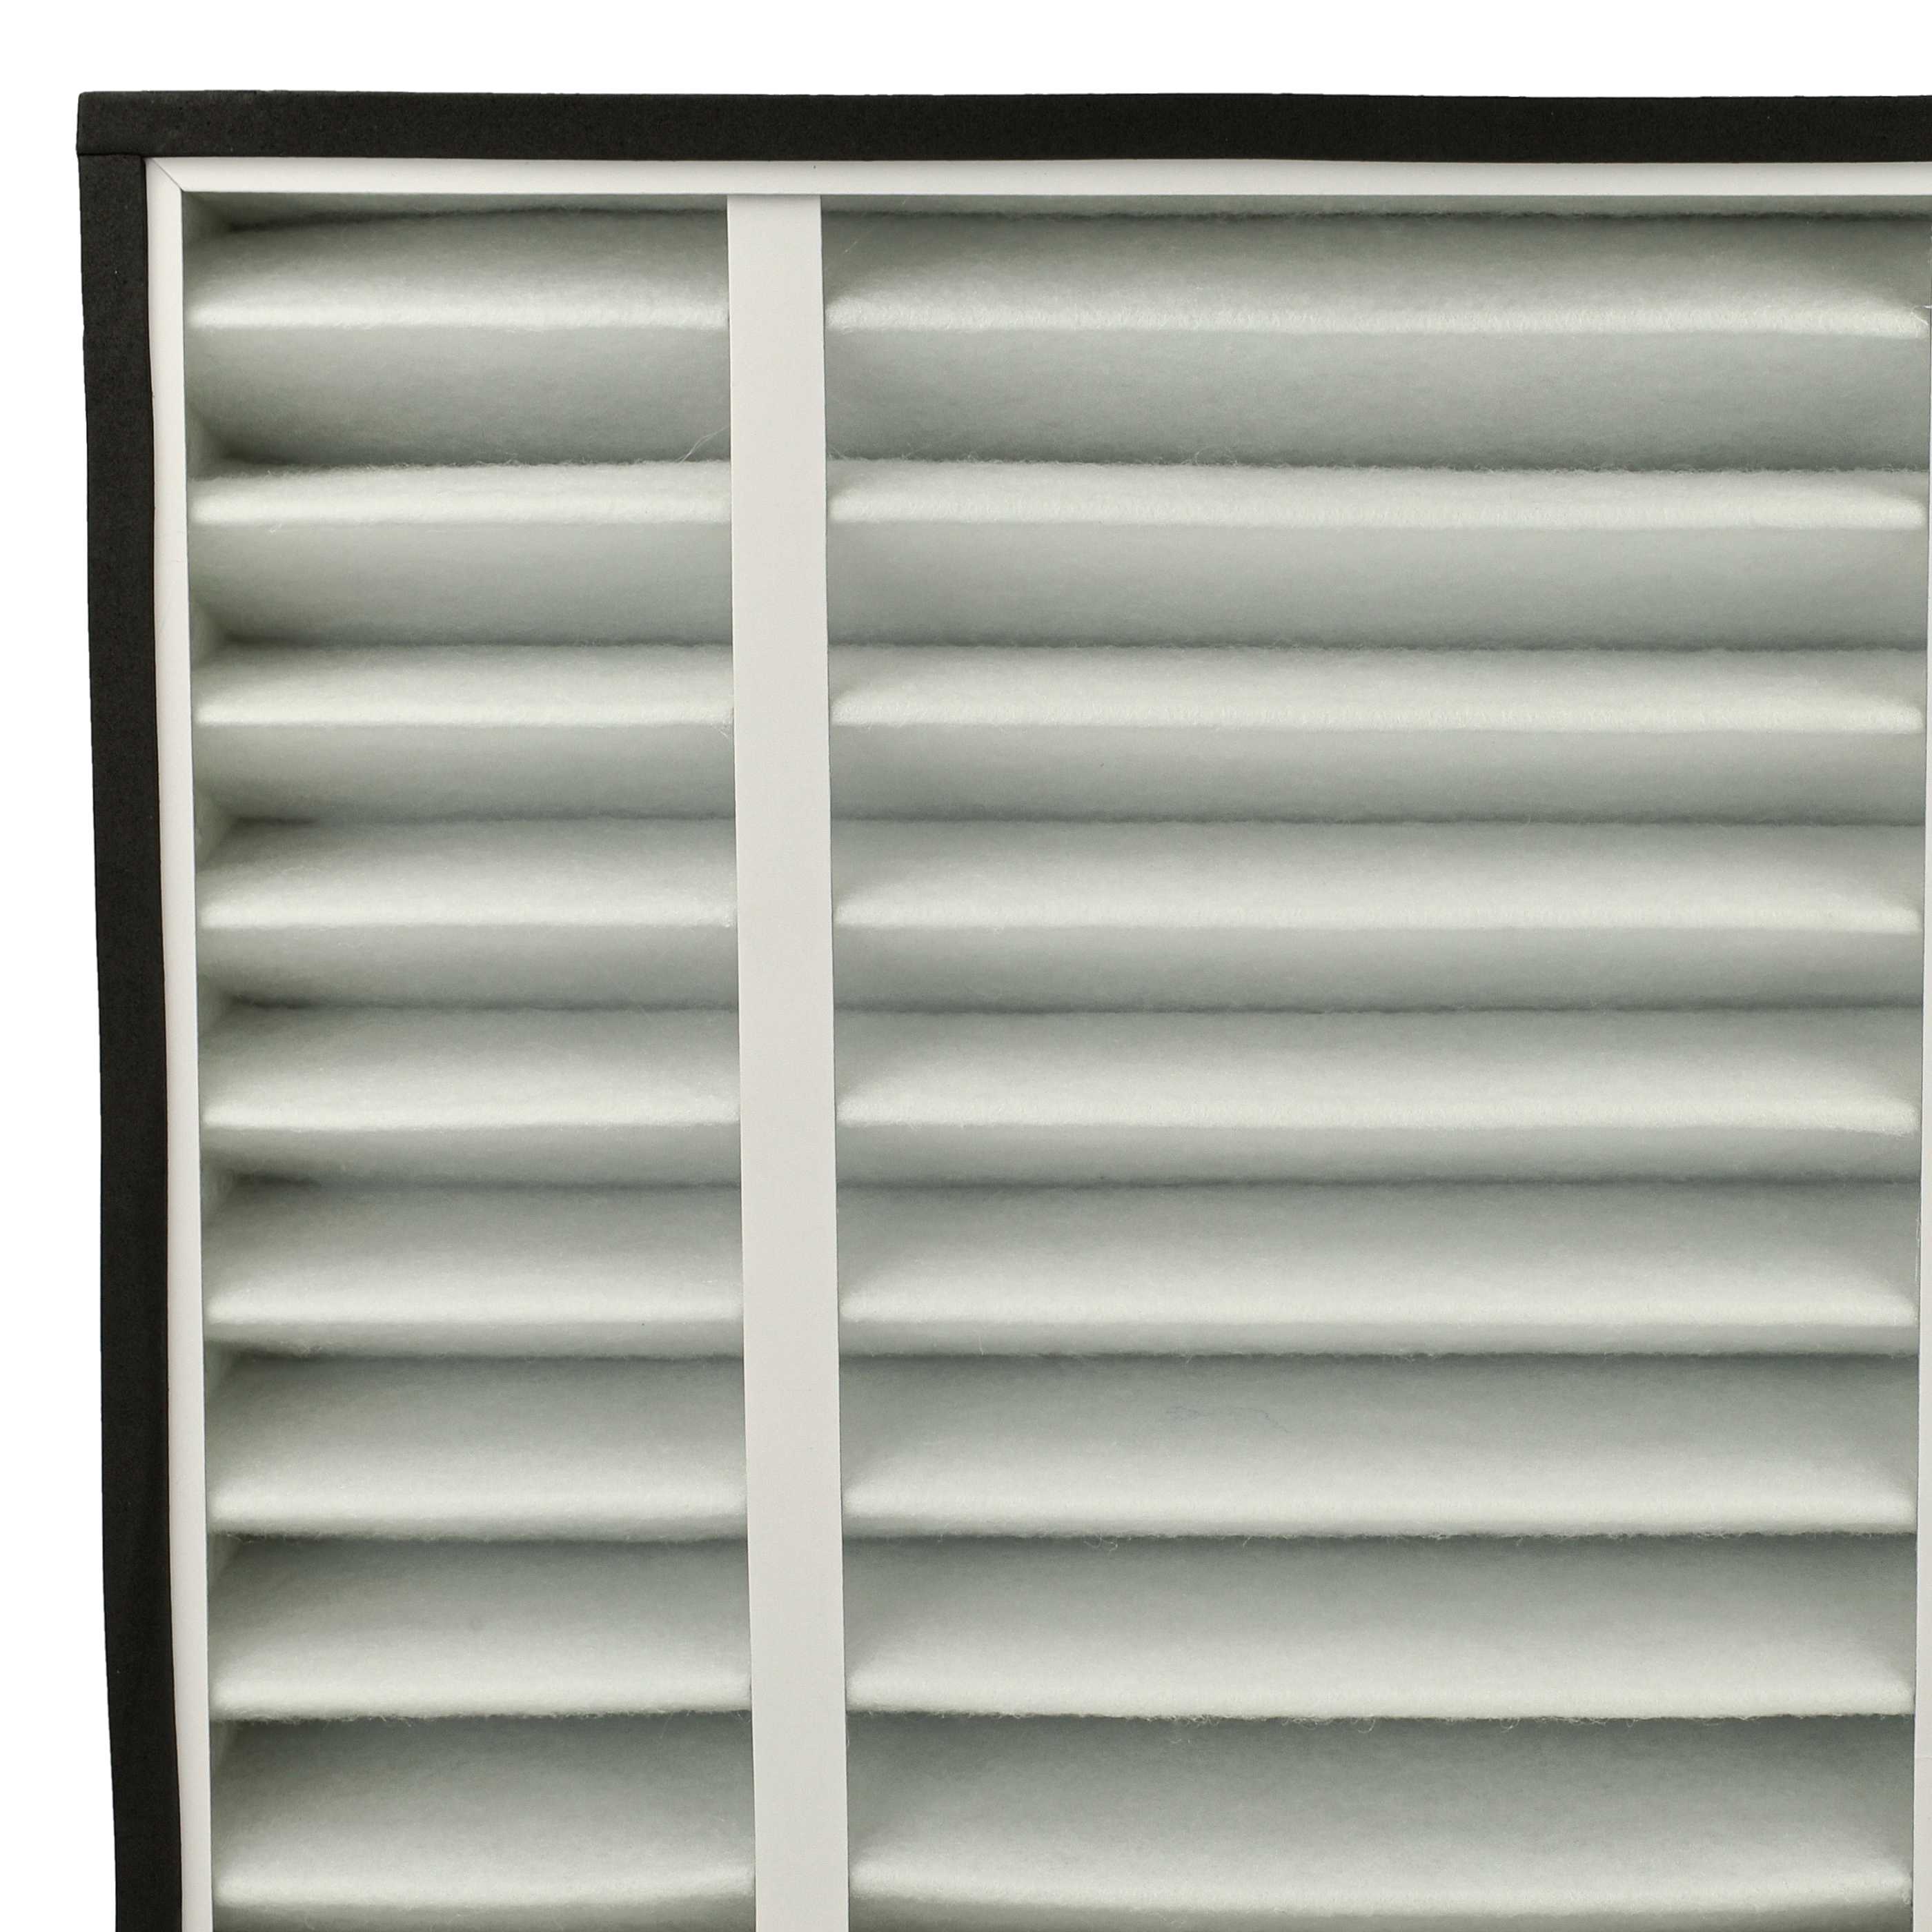 Filter replaces Dustcontrol 42917 for Air Purifier - paper / foam